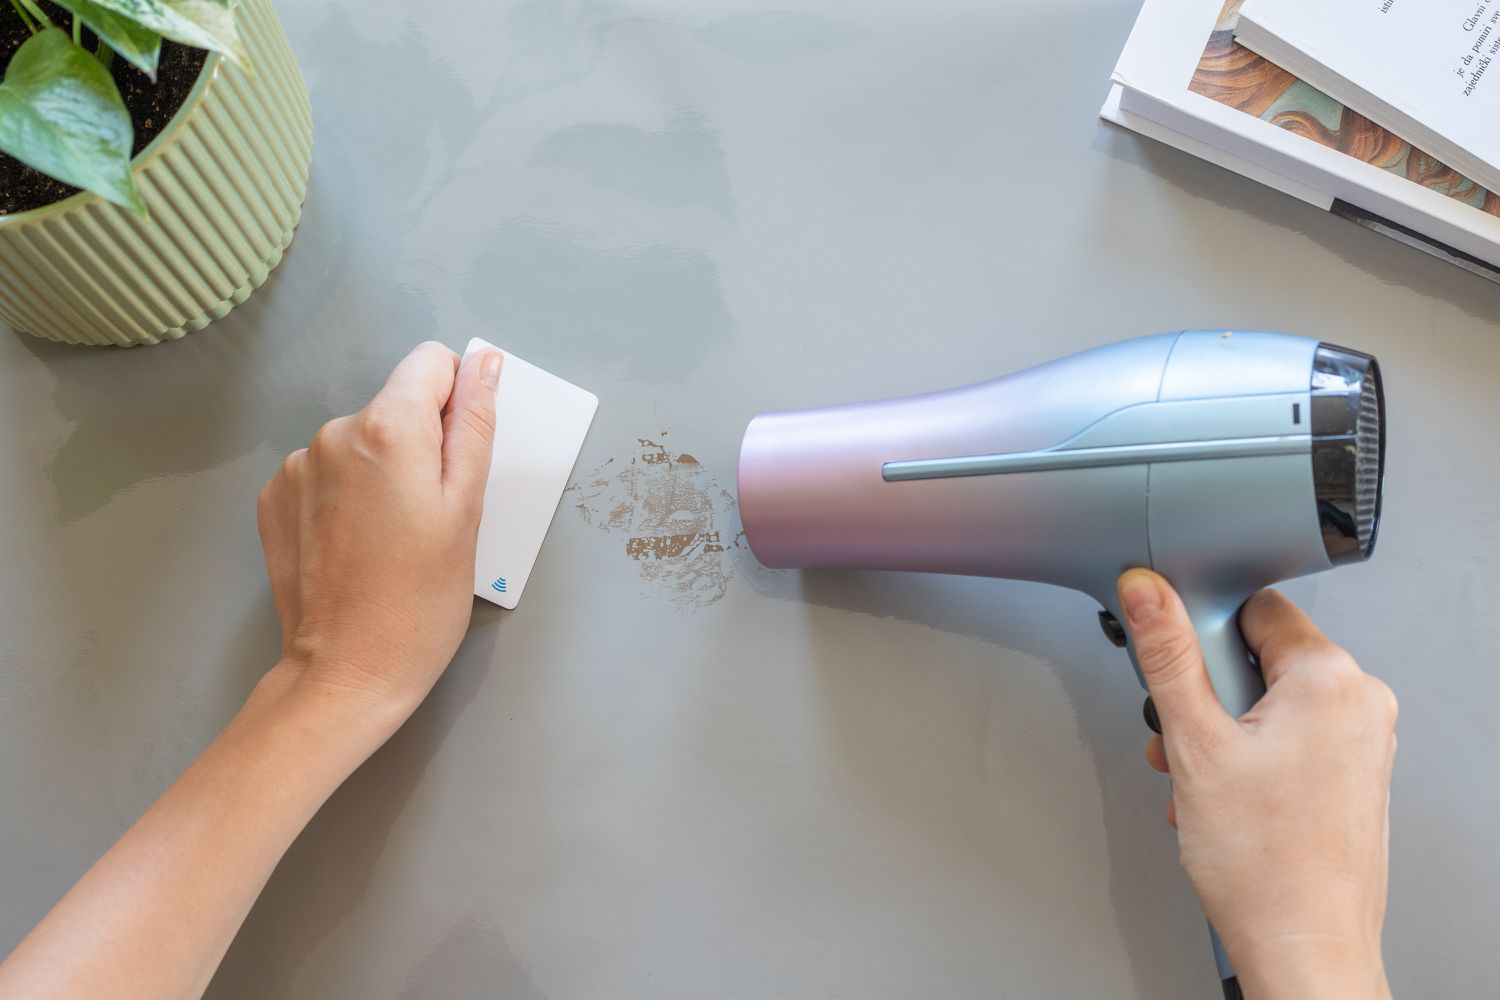 Blow dryer adding heat to tape residue on painted surface and scraped with credit card